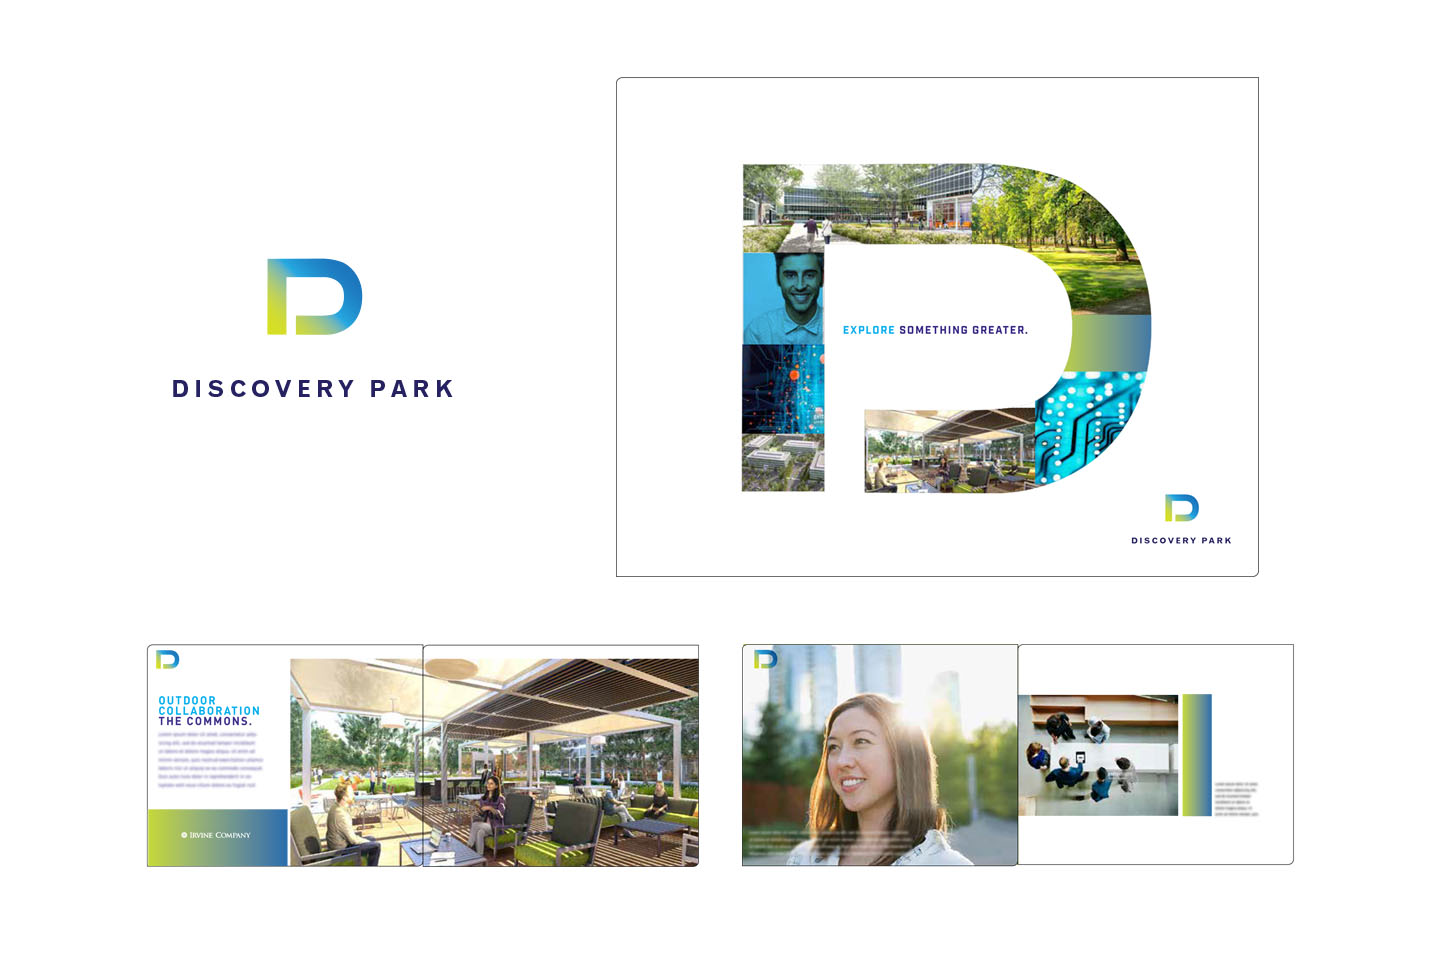 Branding campaign for Orange County commercial real estate development